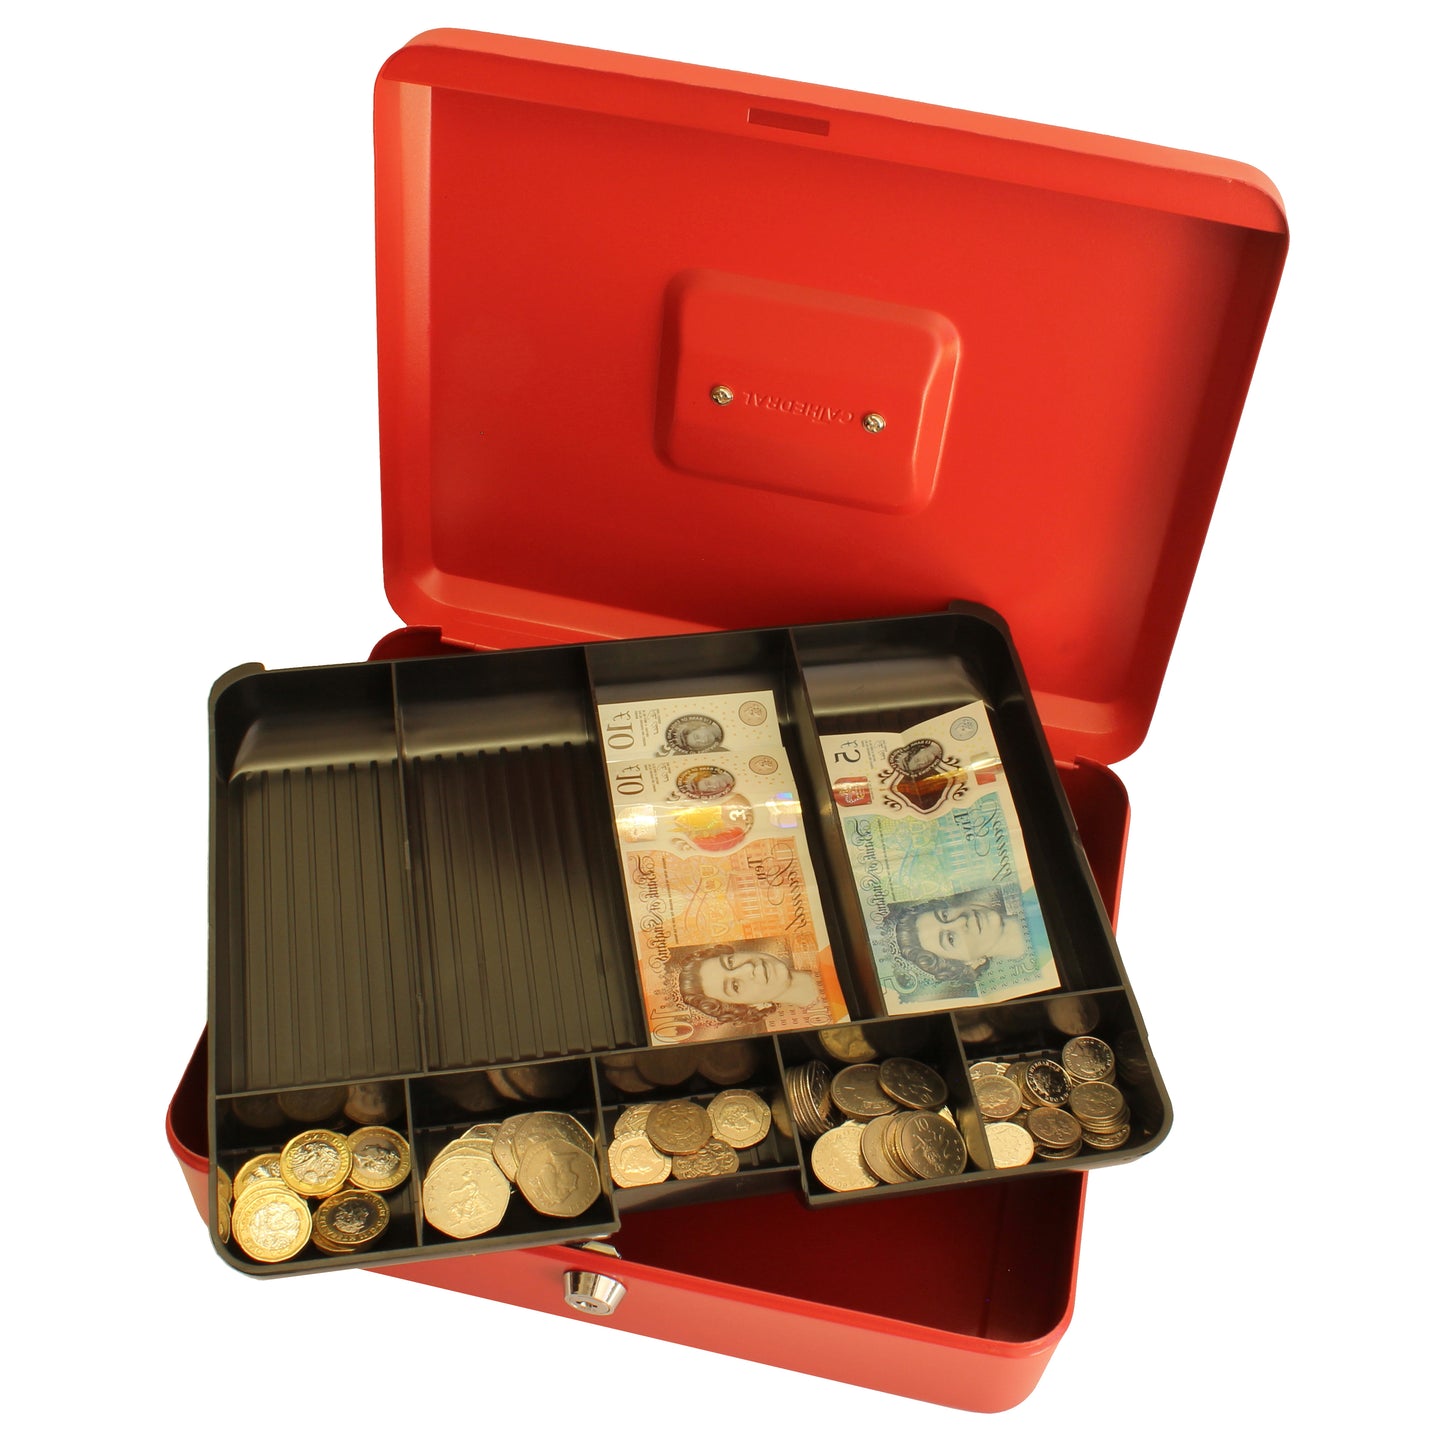 An open, matte red, 12-inch key lockable cash box with a removable 9-compartment coin tray, displaying an assortment of coins and banknotes. 